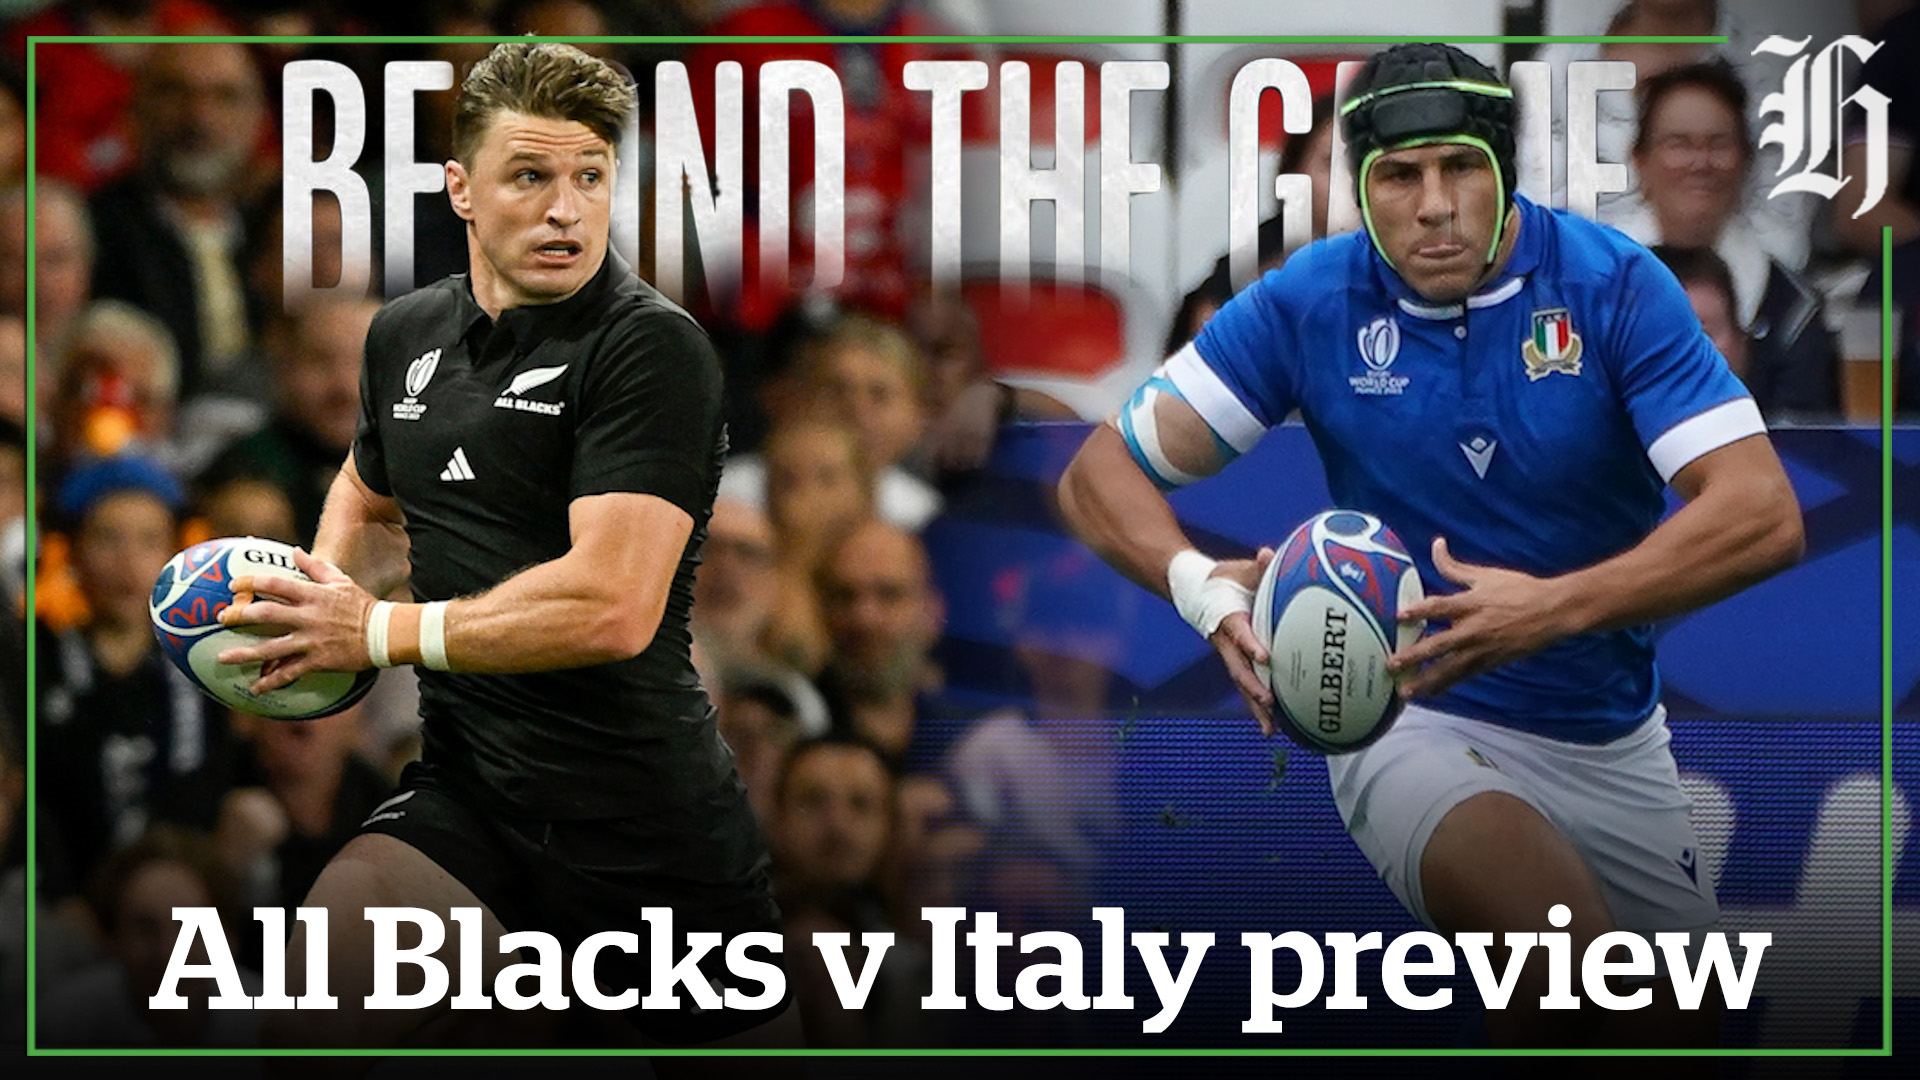 Beyond the Game Do or die game set between All Blacks and Italy